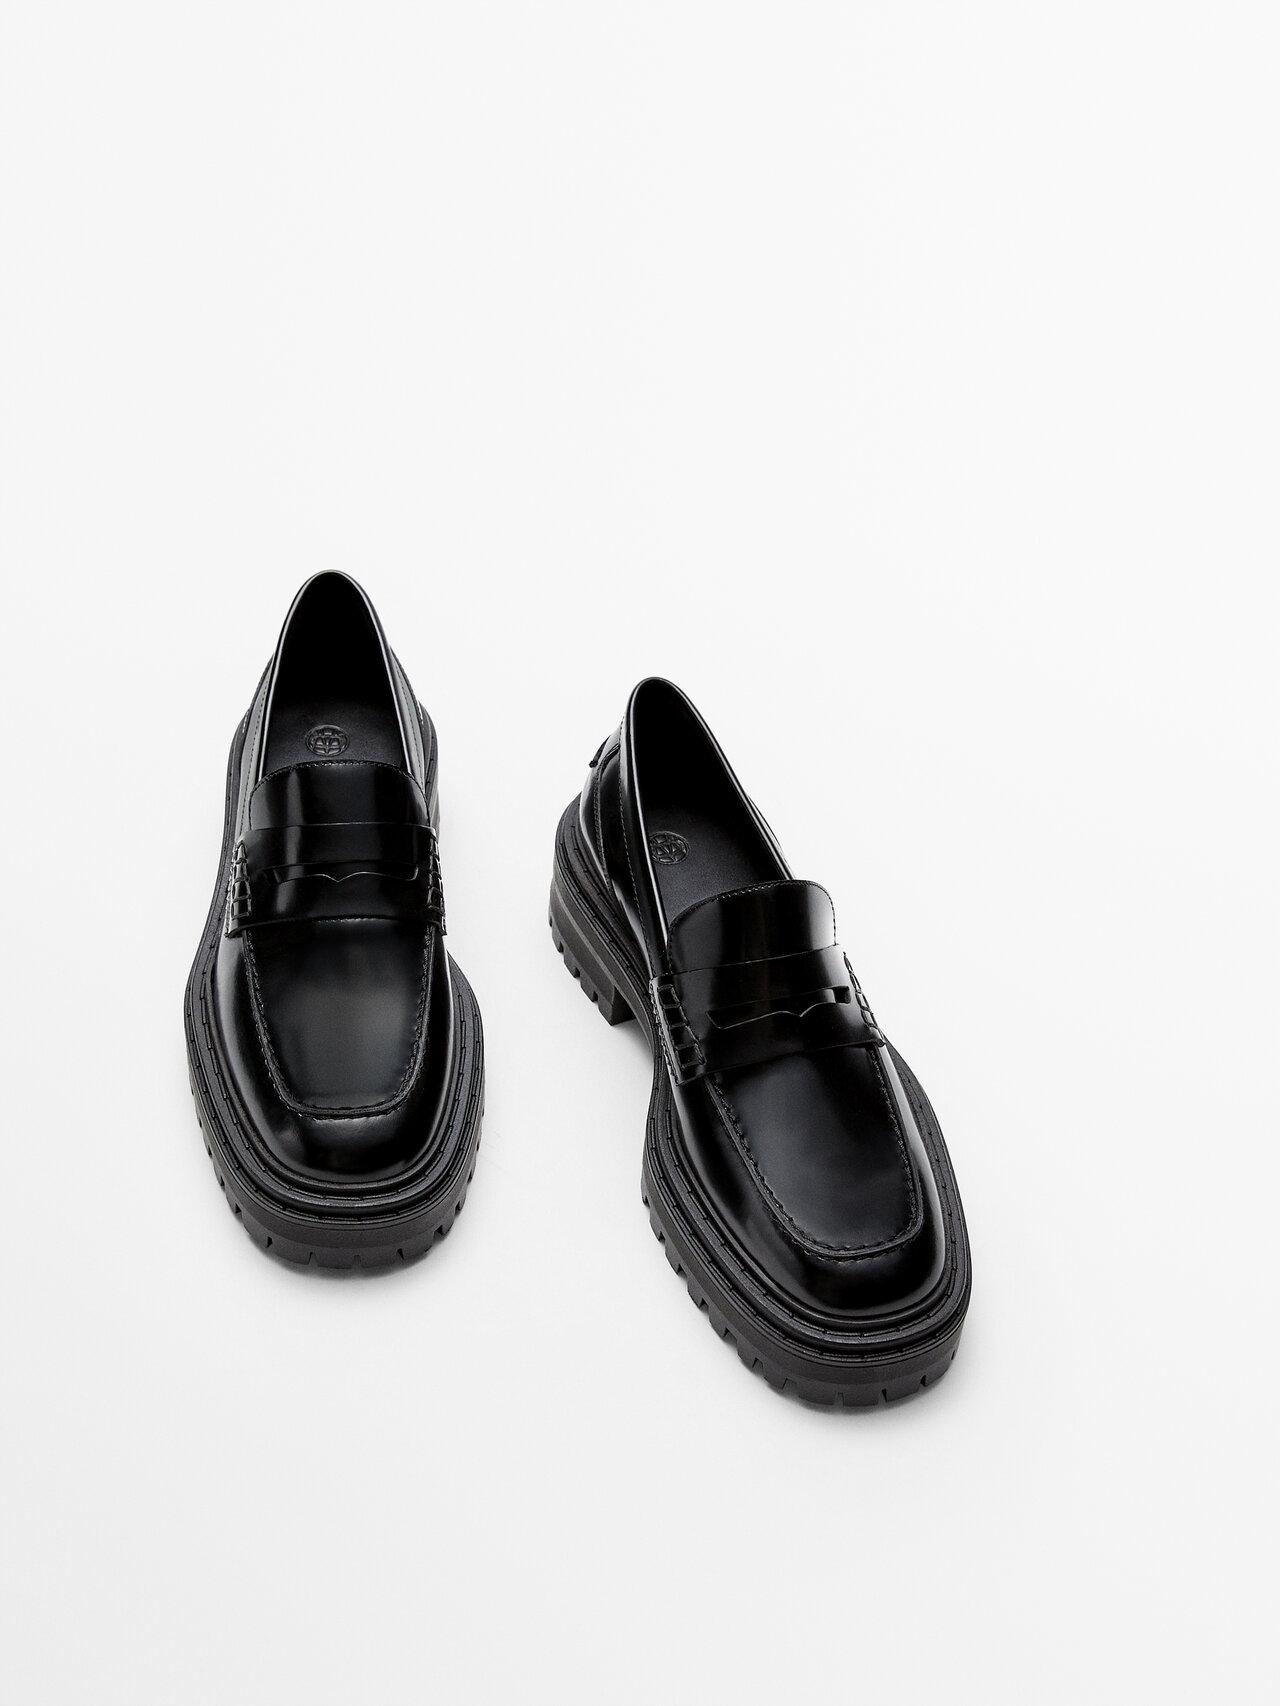 MASSIMO DUTTI Black Leather Loafers With Track Soles | Lyst